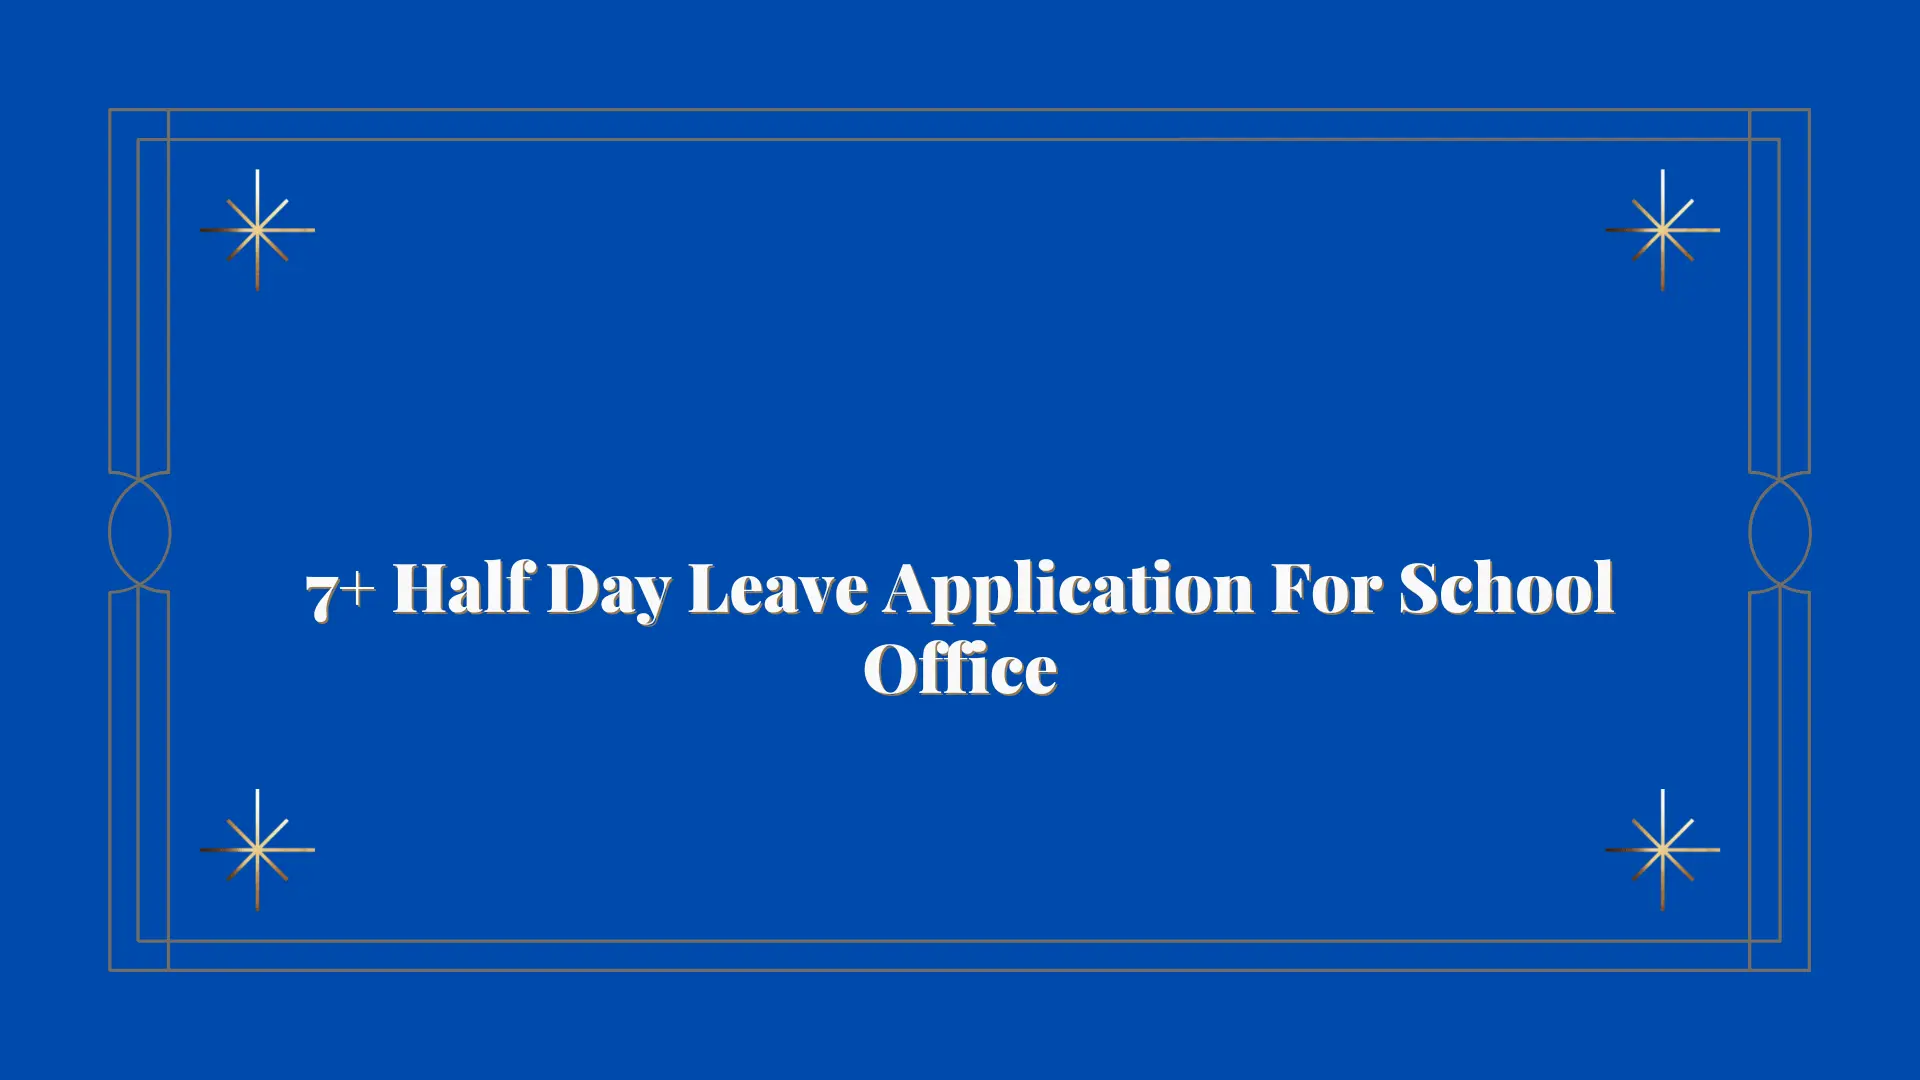 7+ Half Day Leave Application For School Office